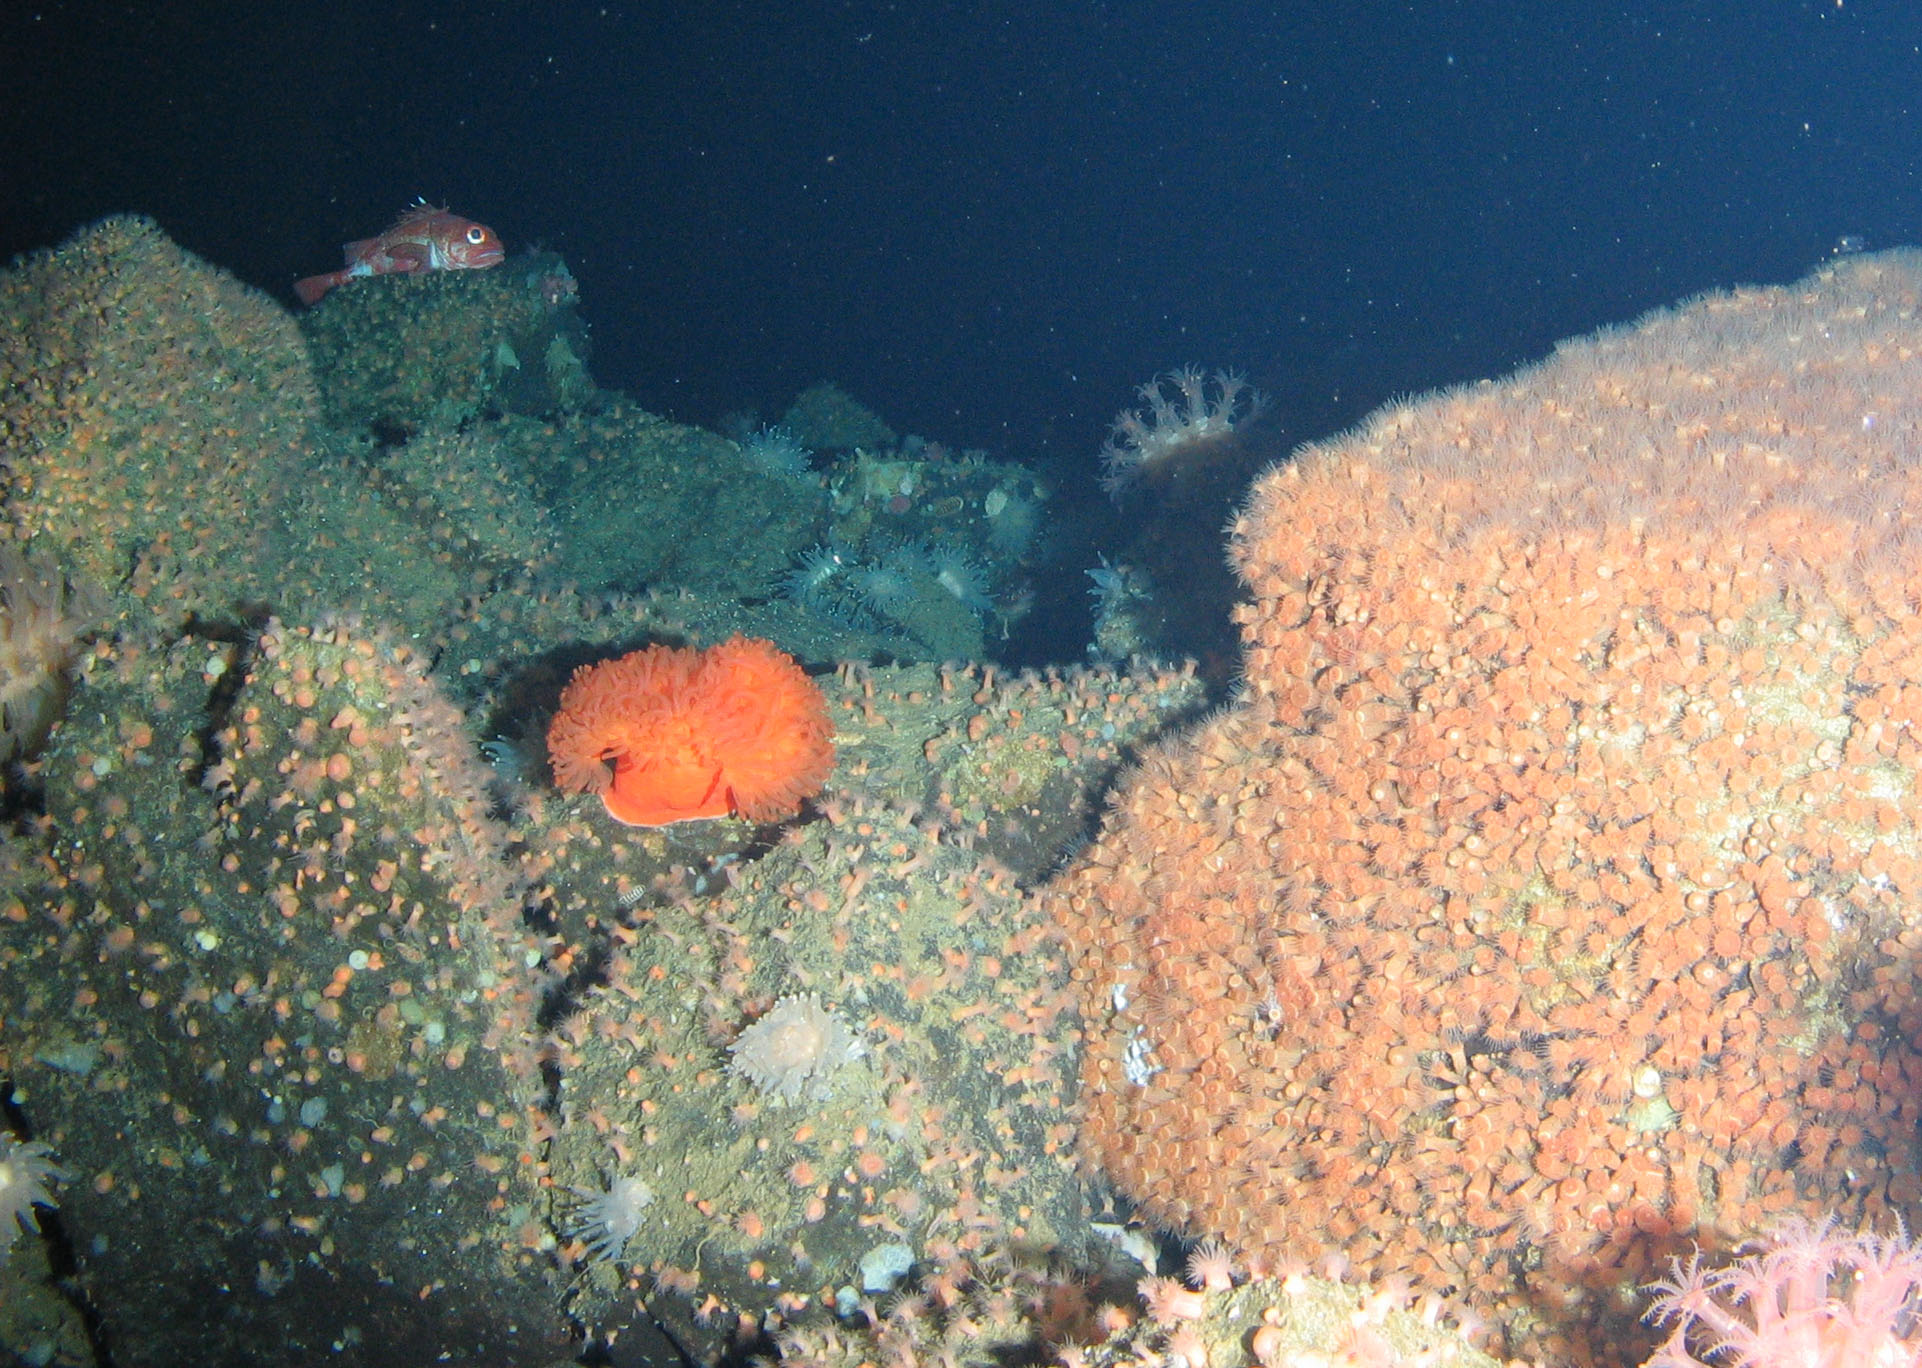 Figure 3. Kingdom of anthozoans on the northern top of the Piip’s Volcano, 380 m: bed of zoantharians to the right, small sea anemones Sagartiidae gen. sp. to the left and around the large orange sea anemone Actinostolidae gen. sp., Corallimorphus pilatus, Anthomastus ritteri and rockfish Sebastes sp.